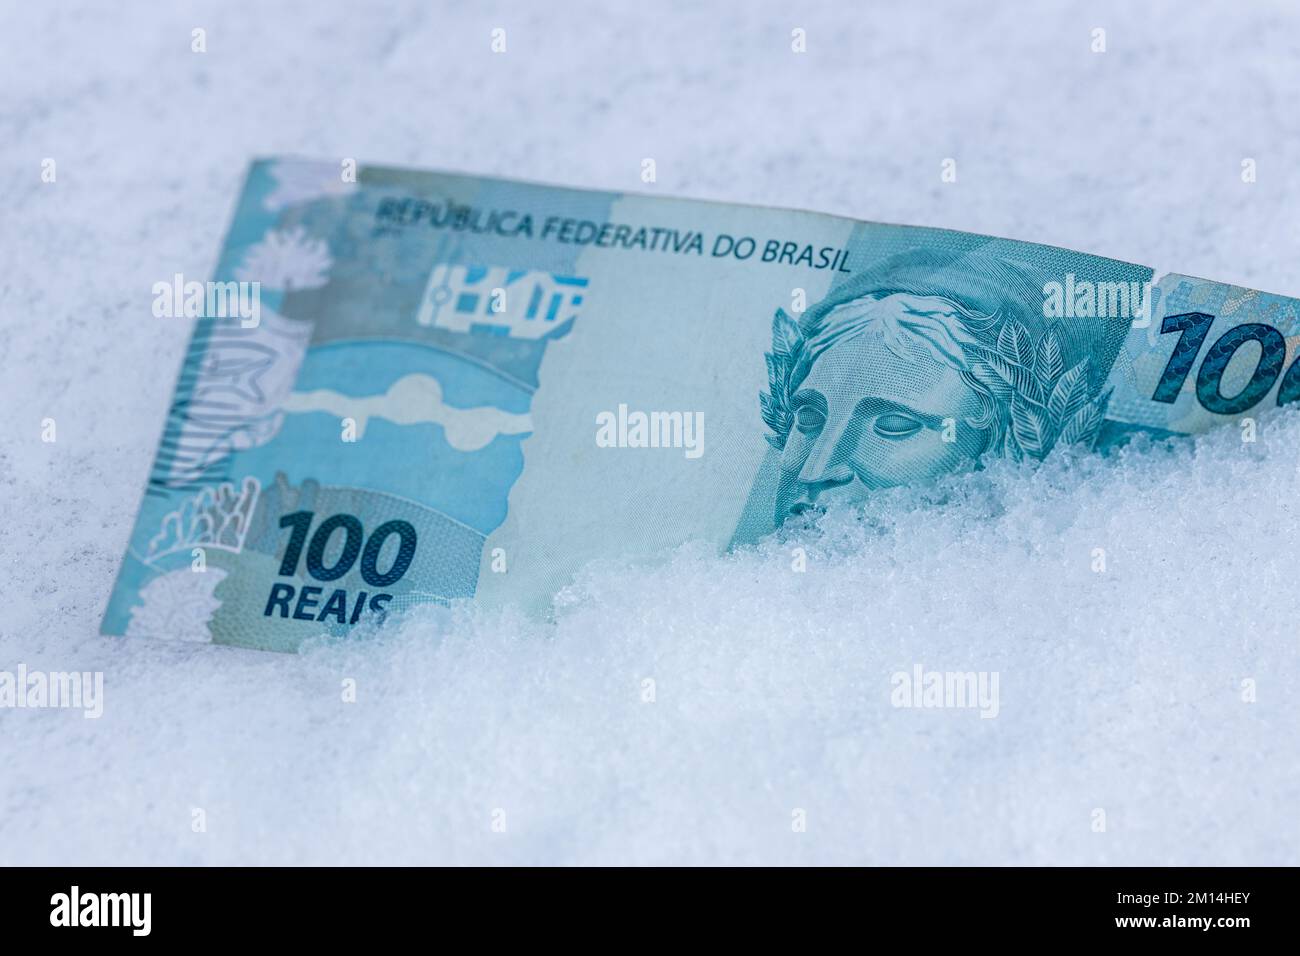 Brazil money, 100 reais banknote lying in the snow, financial concept, spending freeze Stock Photo